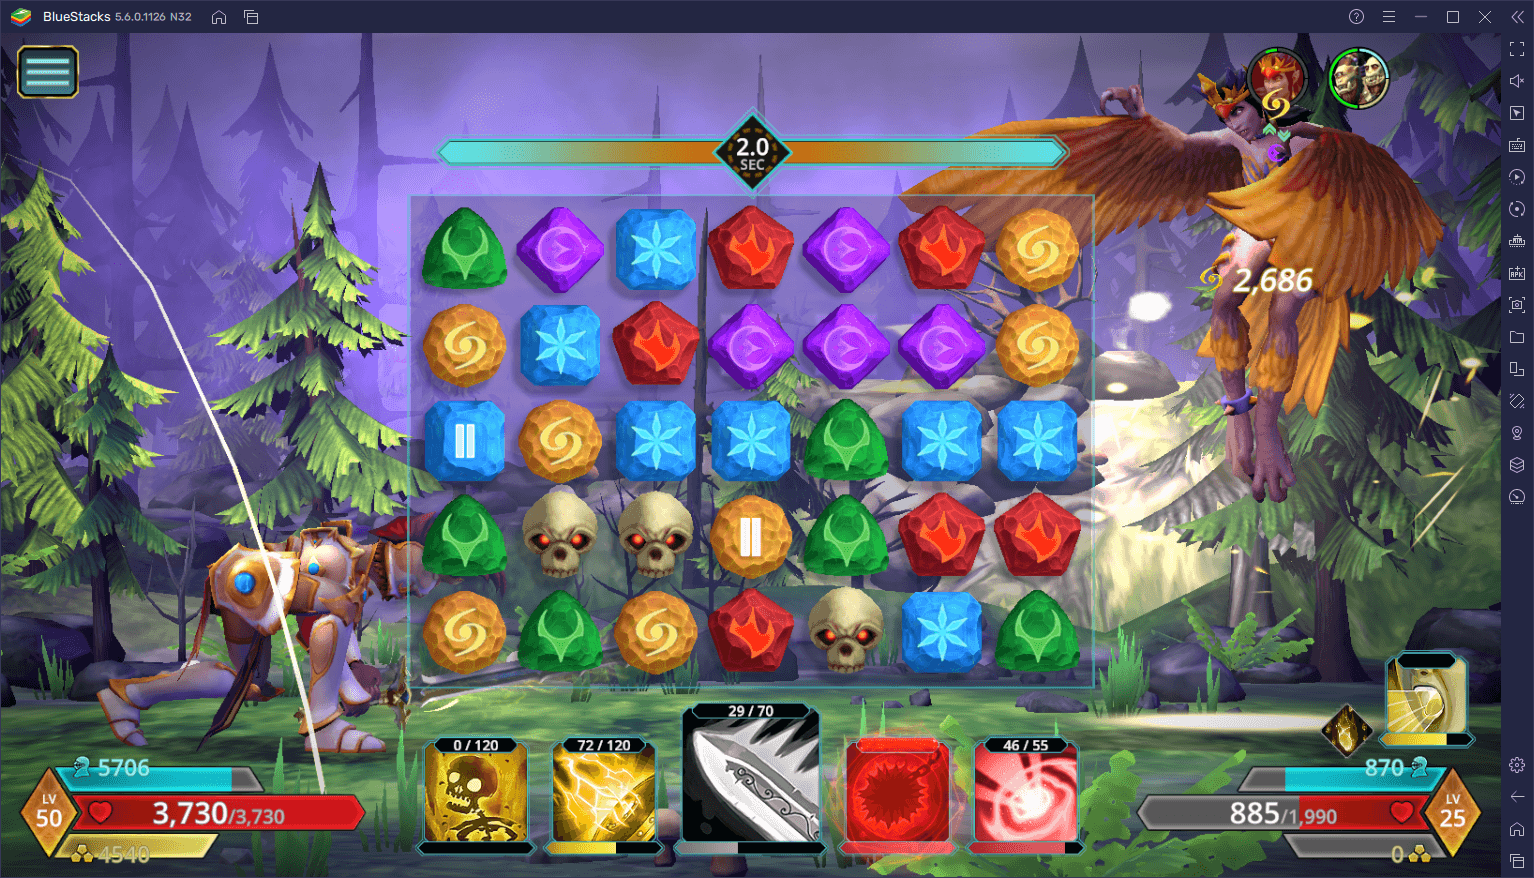 The Best Puzzle Quest 3 Tips and Tricks For Starting on the Right Track